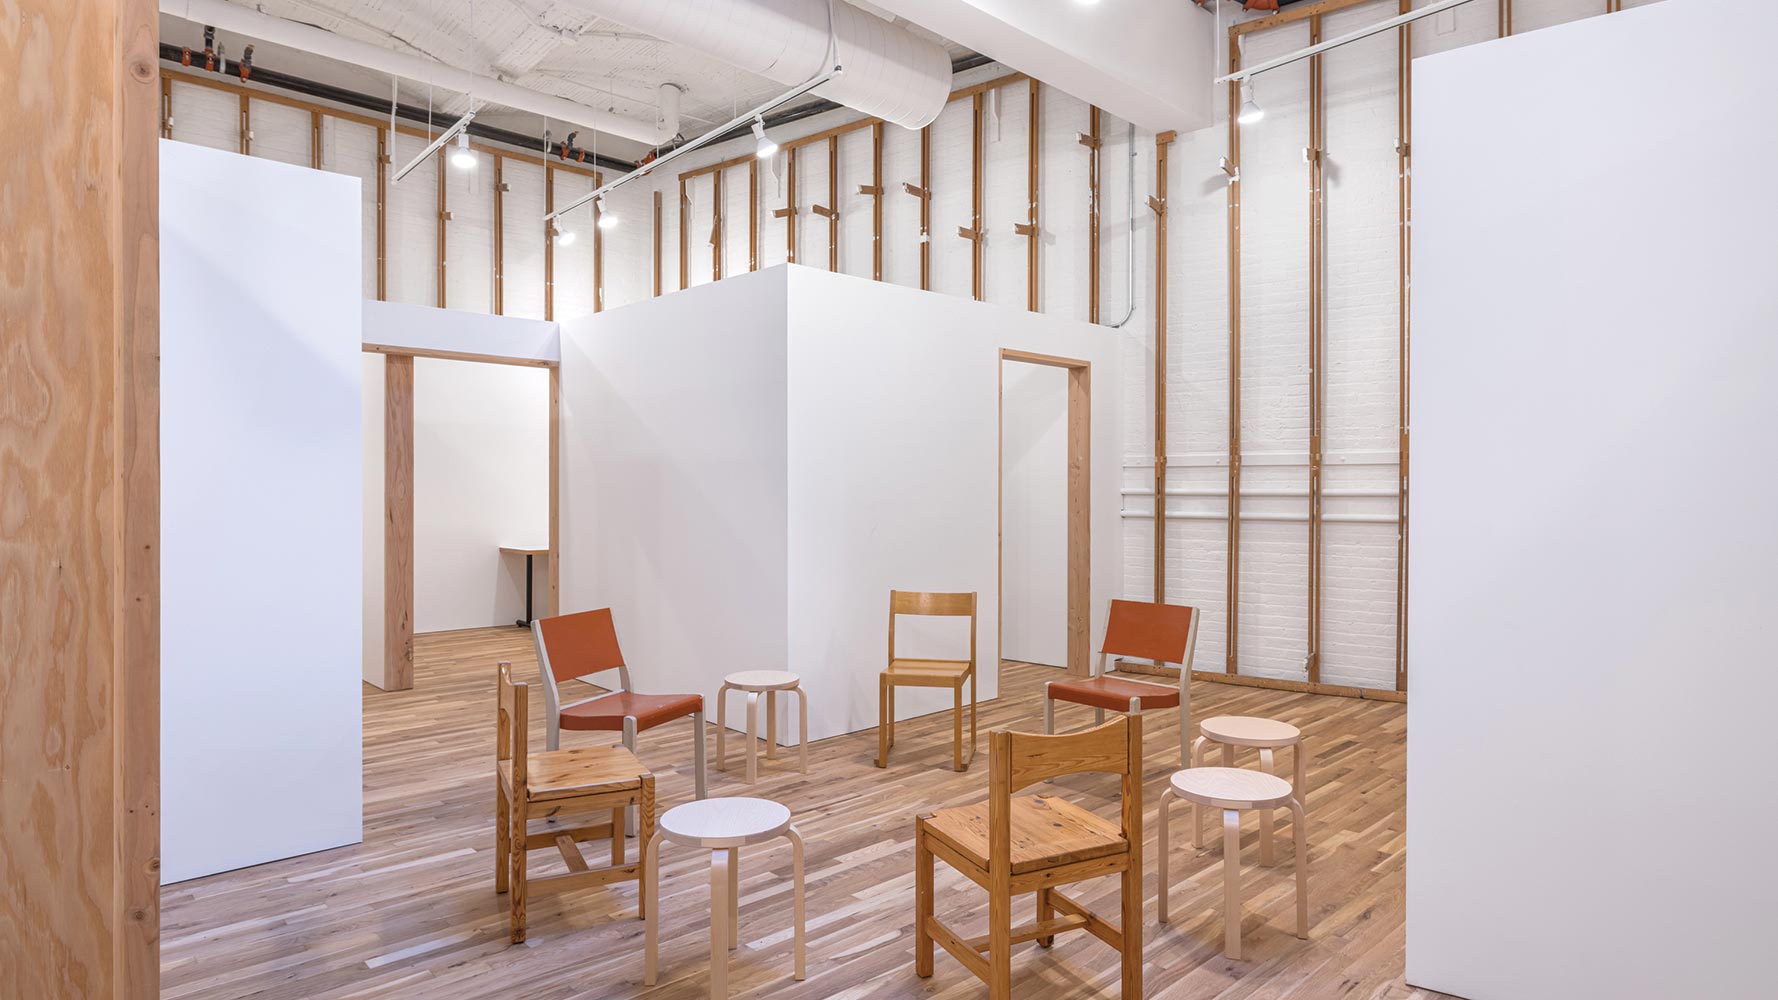 Currents: A New Home for the Whitney's Independent Study Program